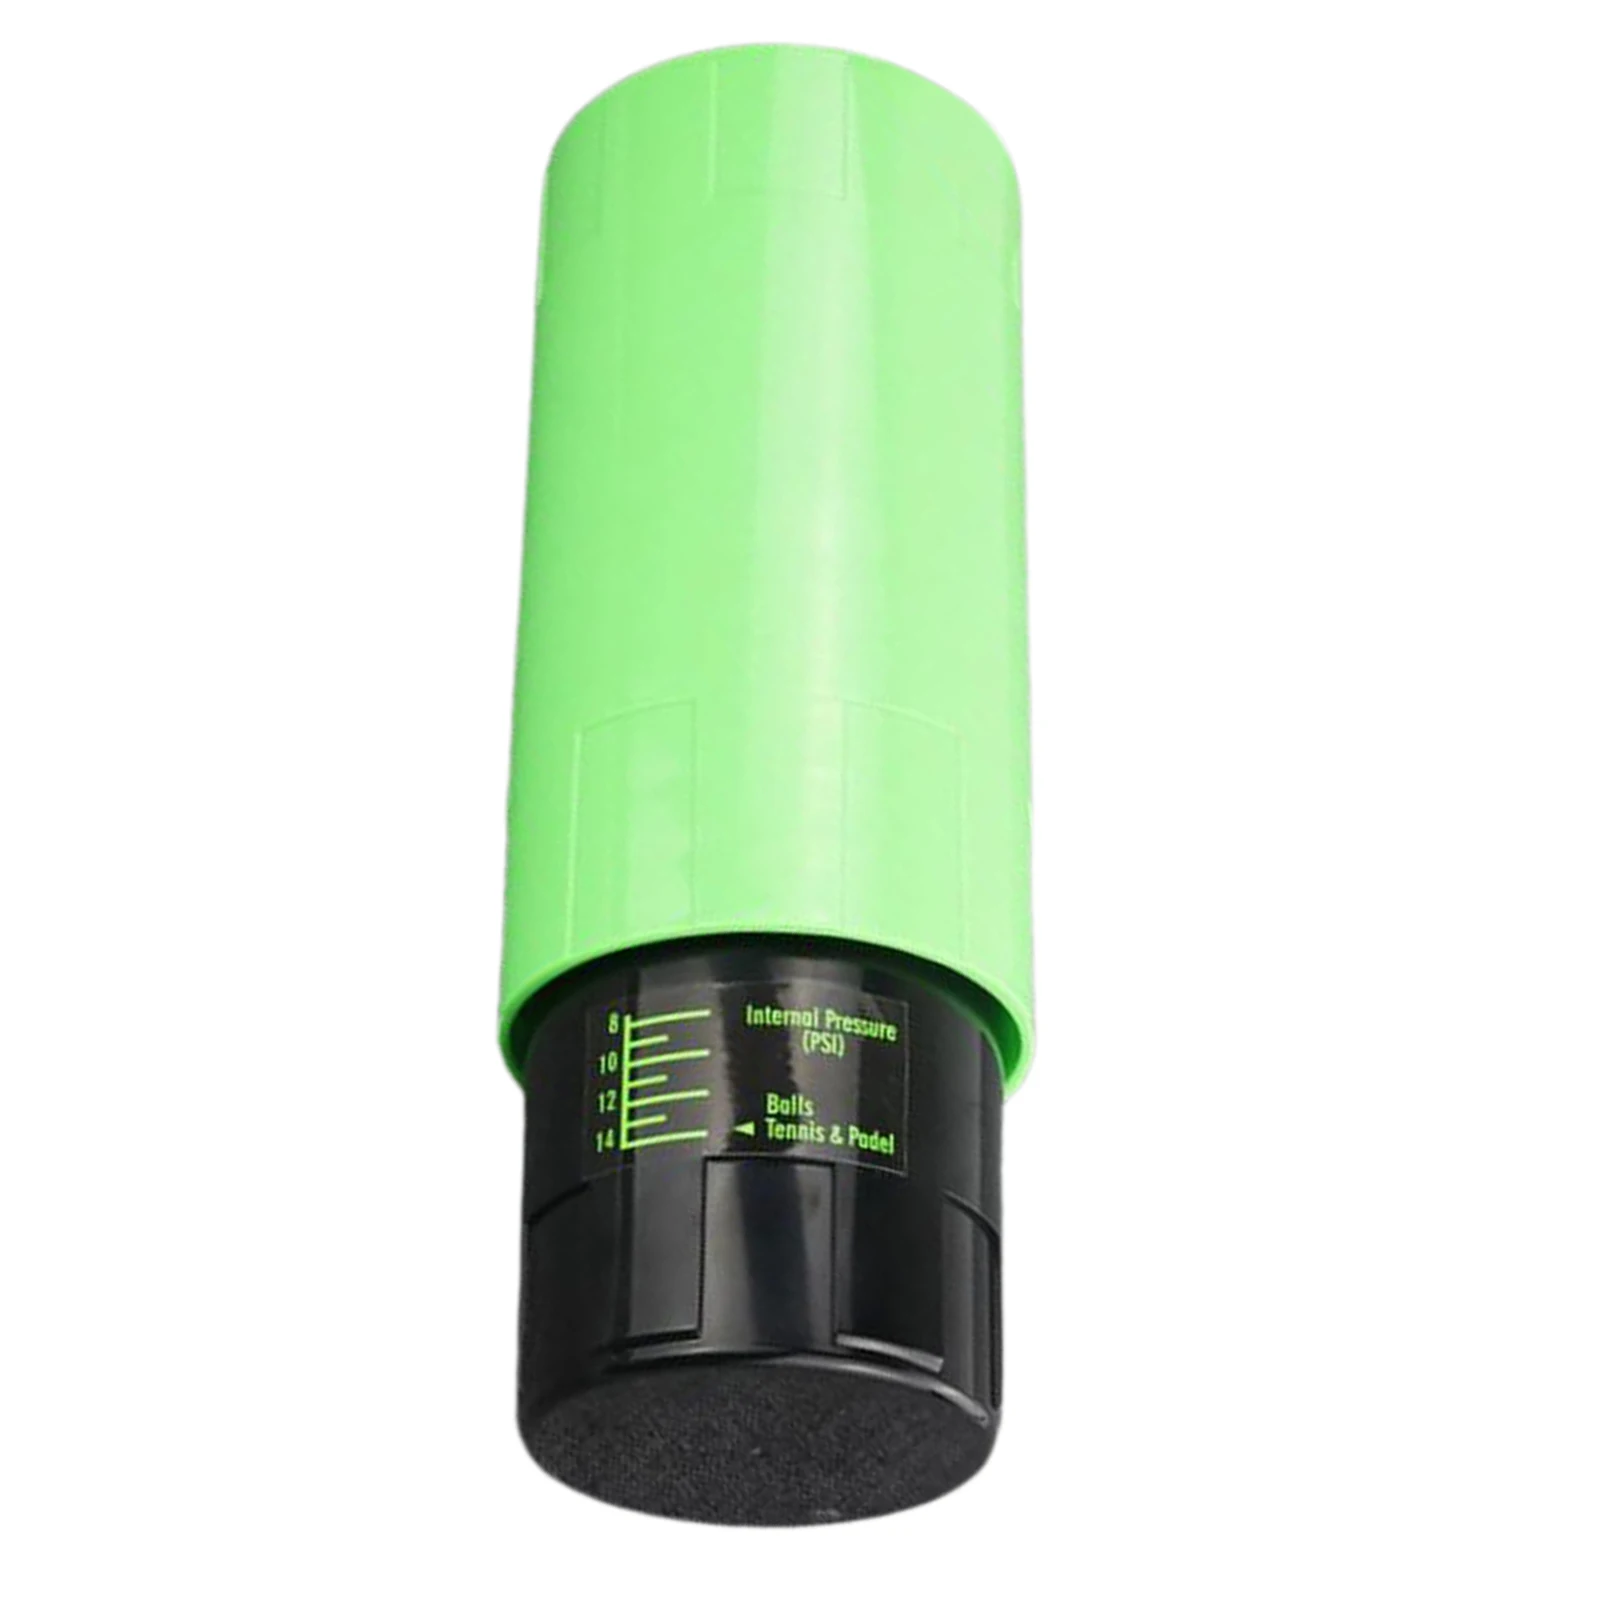 Tennis Ball Pressurizer Portable Durable Tennis Balls Protective Holder Transport Storage Containers Tube Carrier